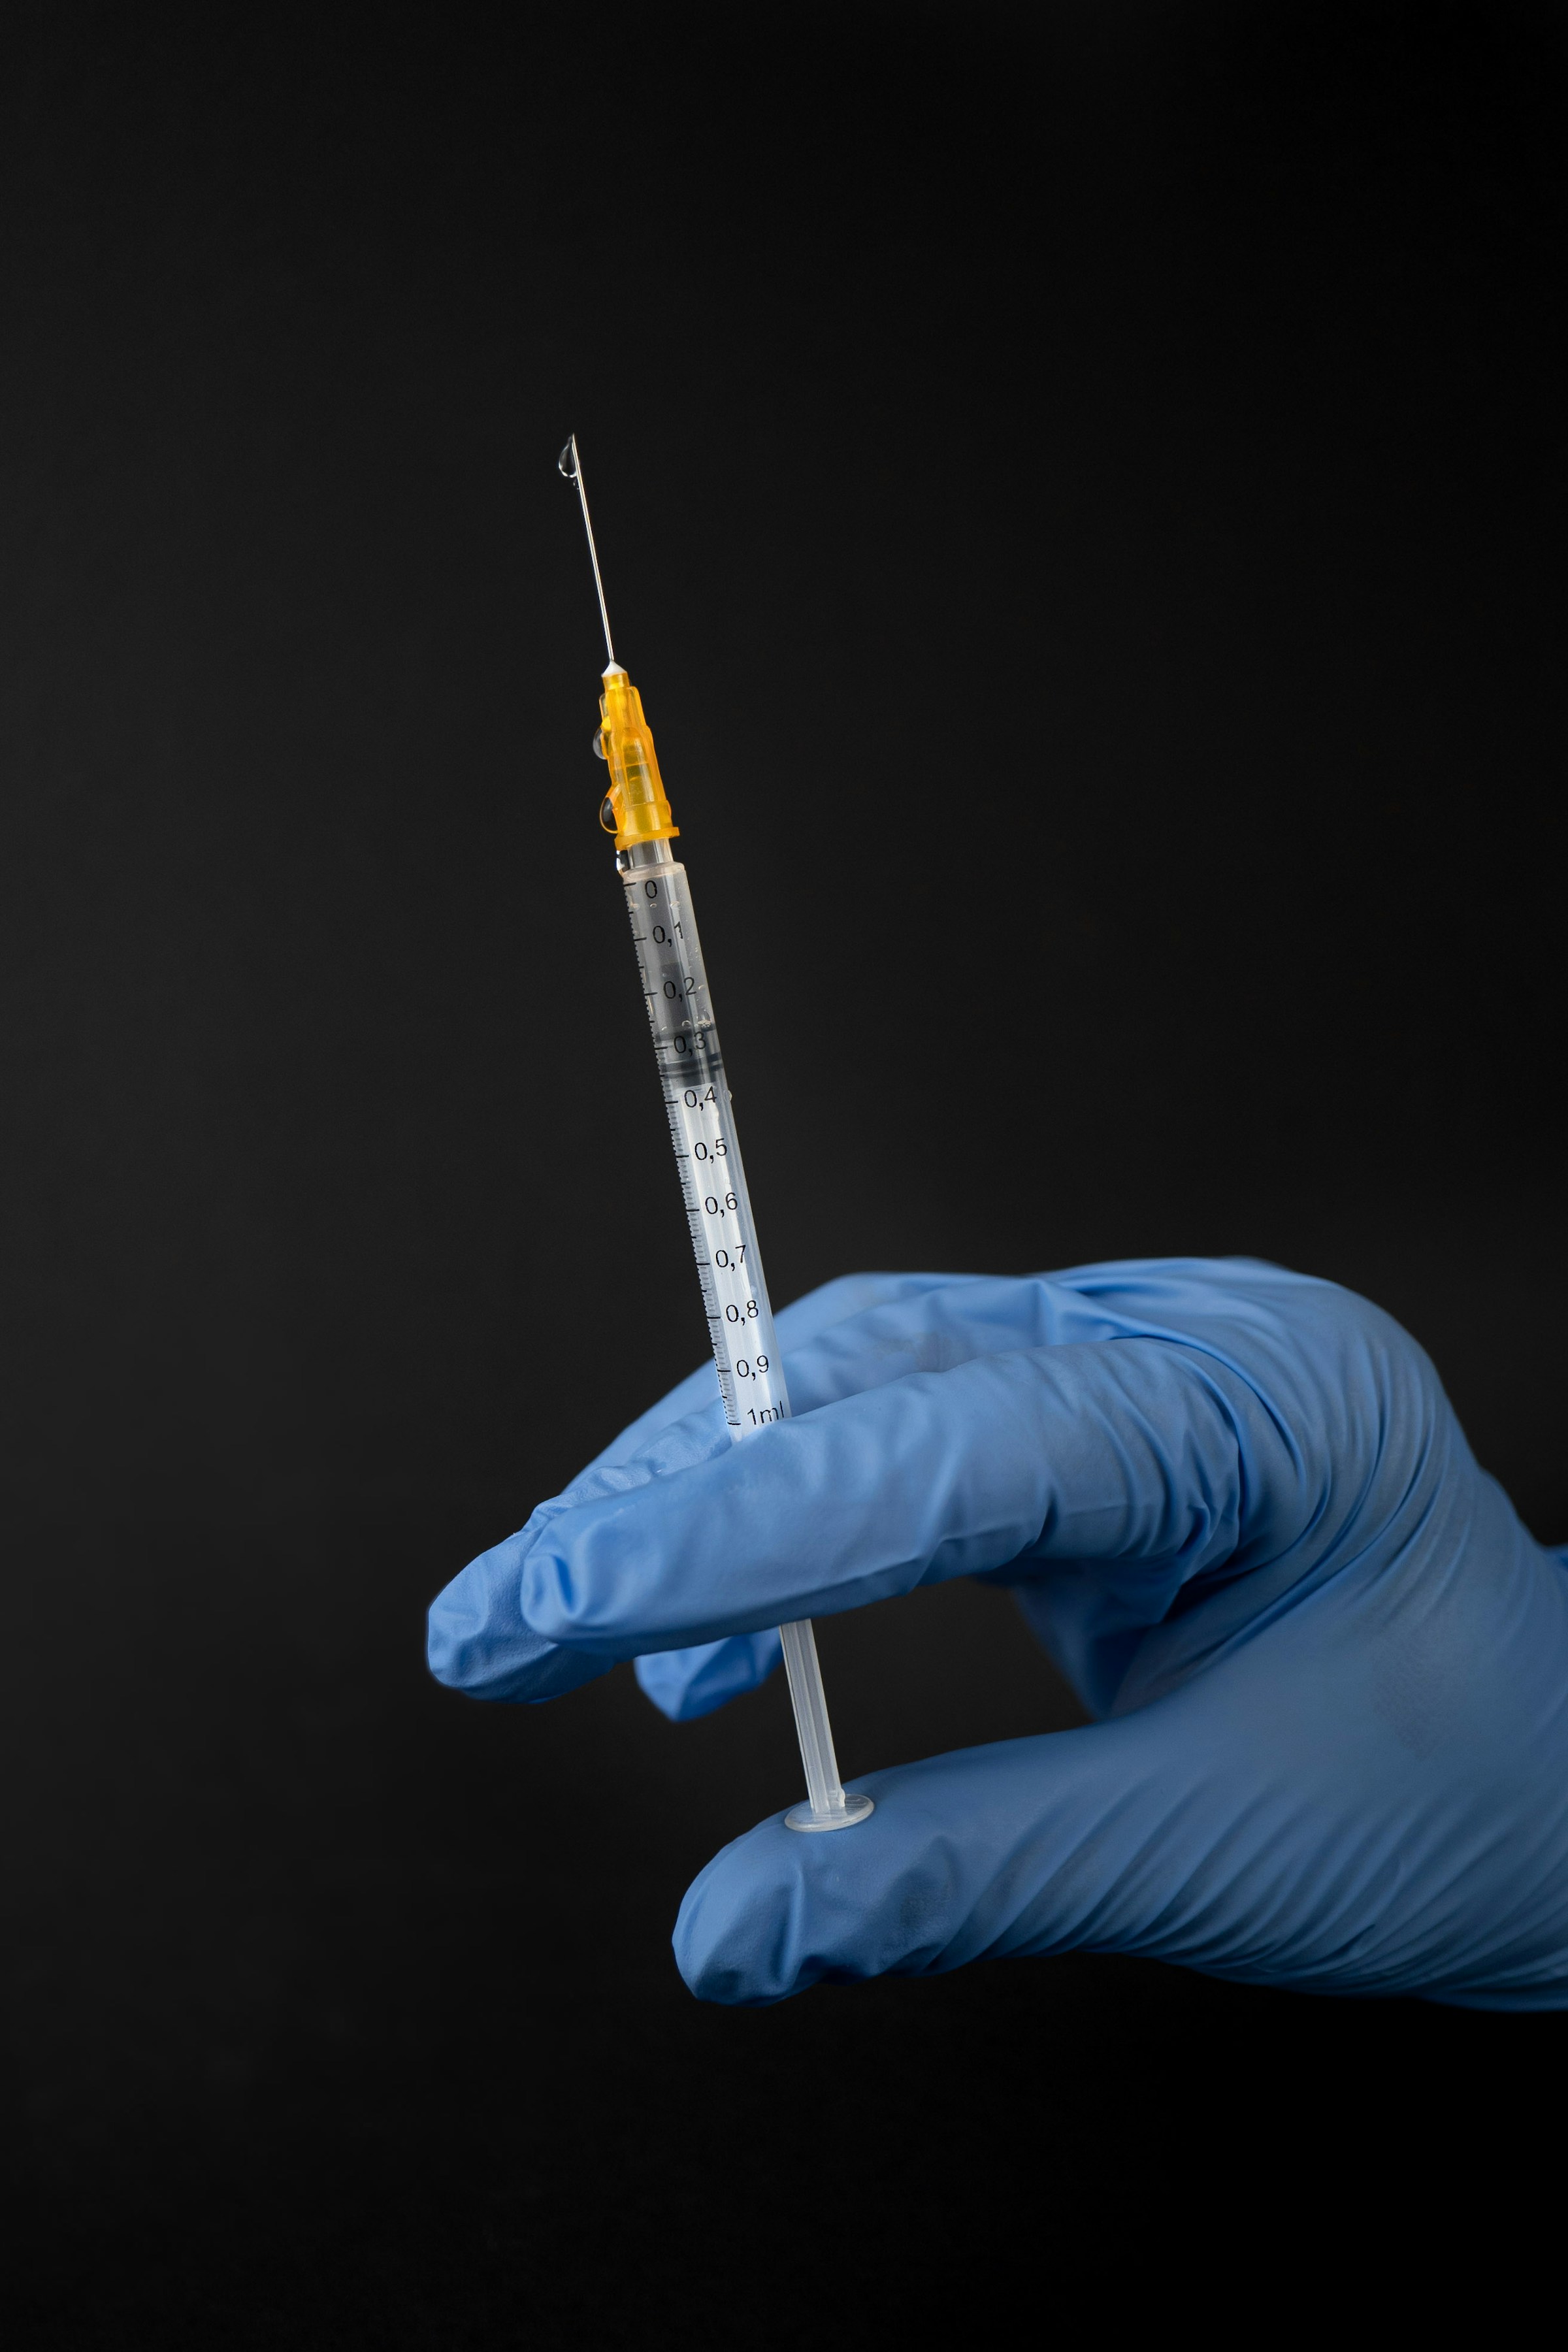 A person holding an injection | Source: Unsplash